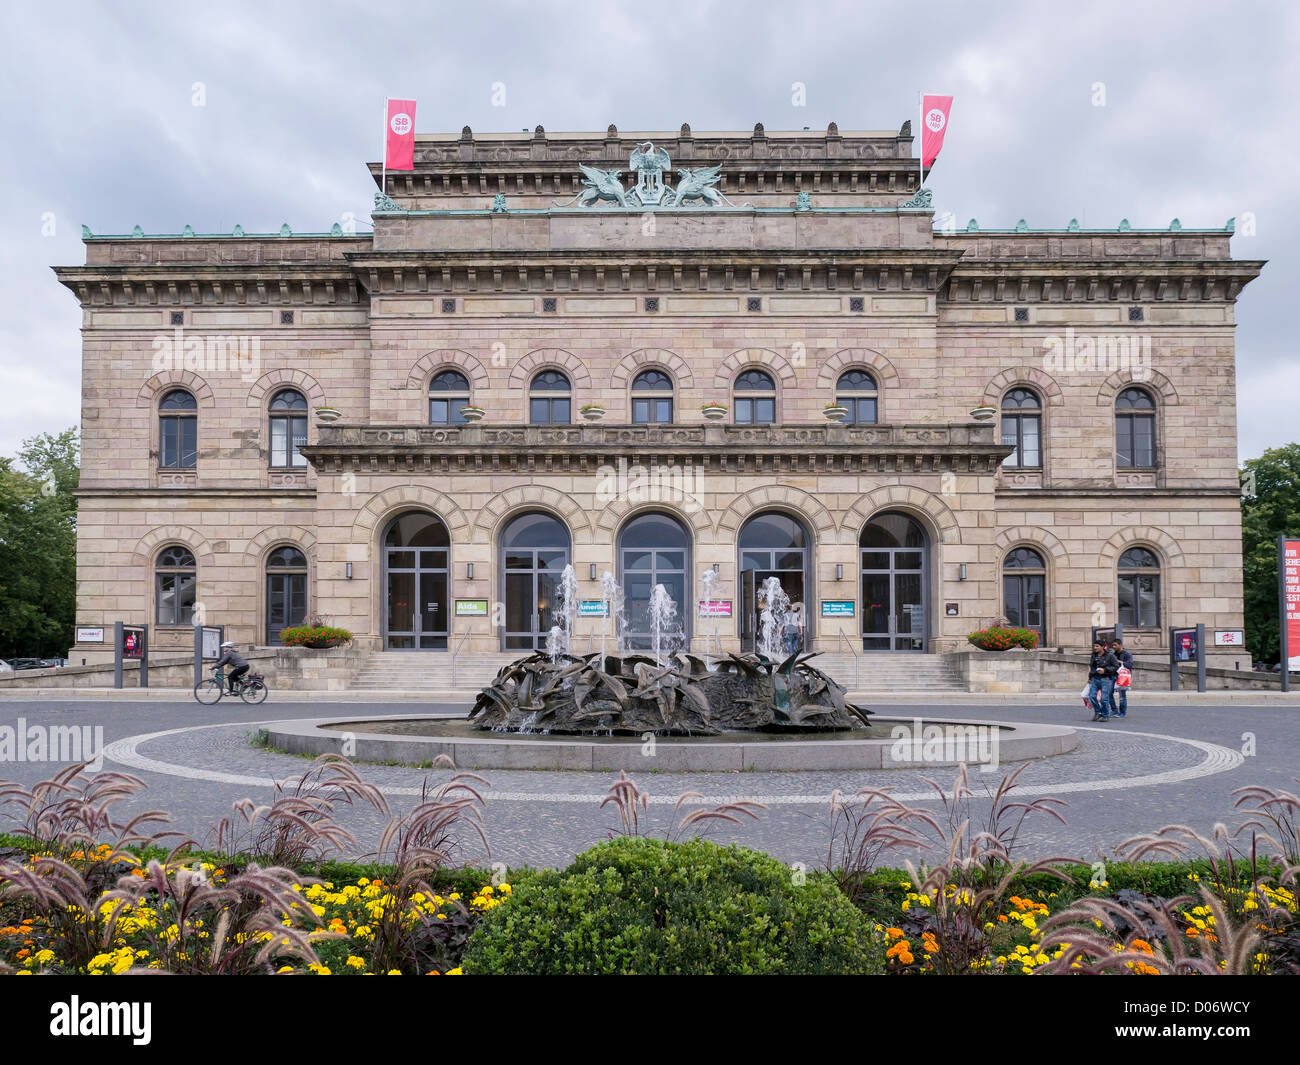 The opera house and theatre building (Staatstheater) in Braunschweig, Germany. Stock Photo